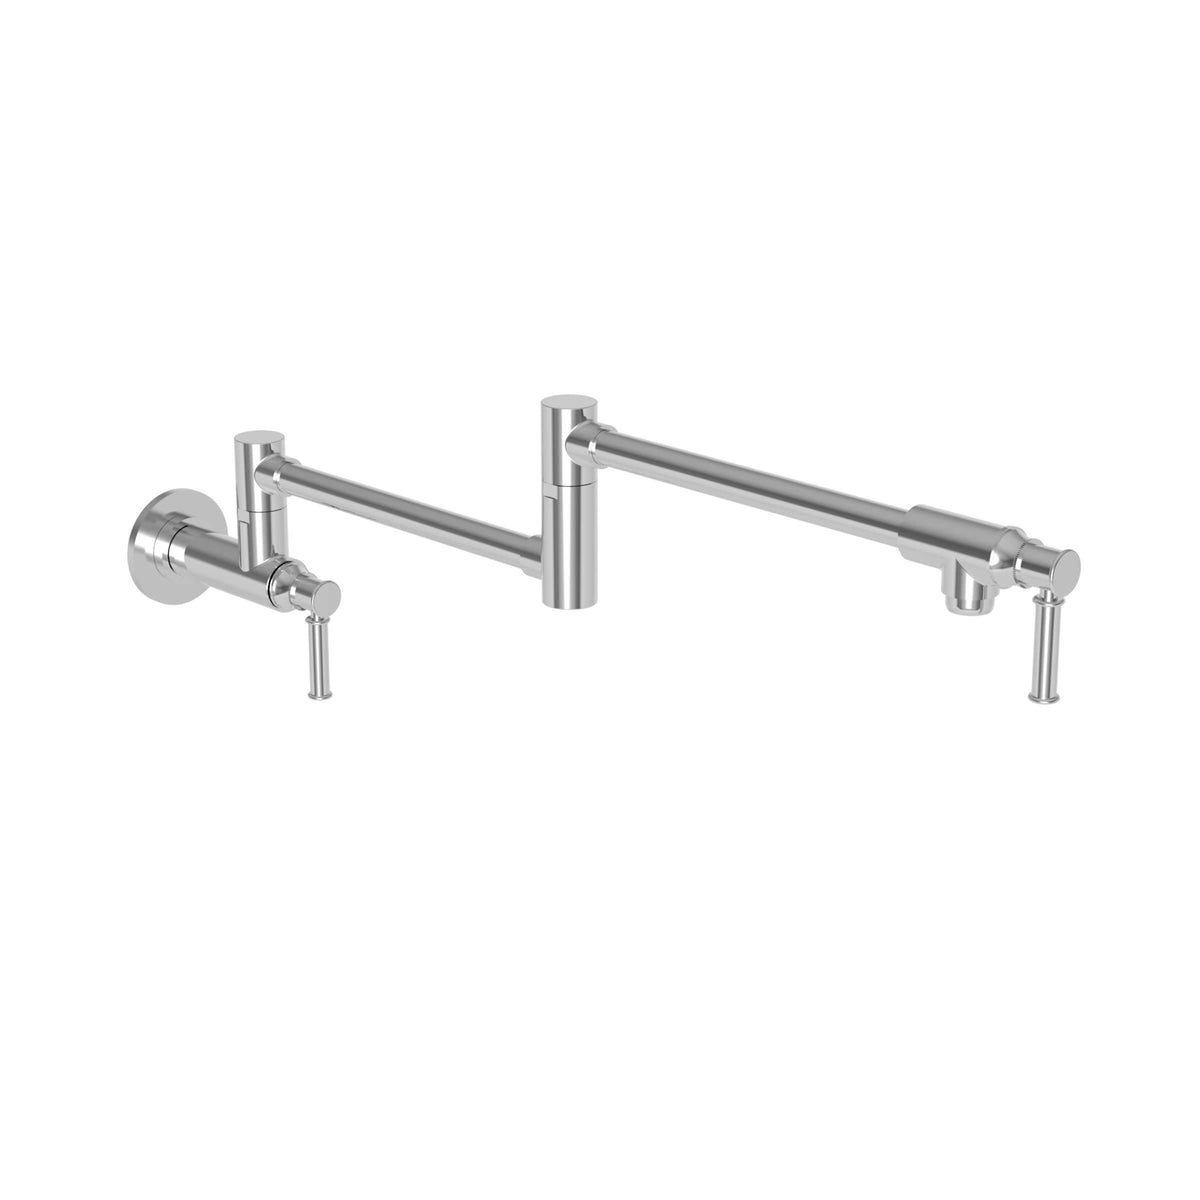 We will discover the Newport Brass 2940-5503 Jacobean Pot Filler Wall  Mount Newport Brass suitable for you with our expert staff